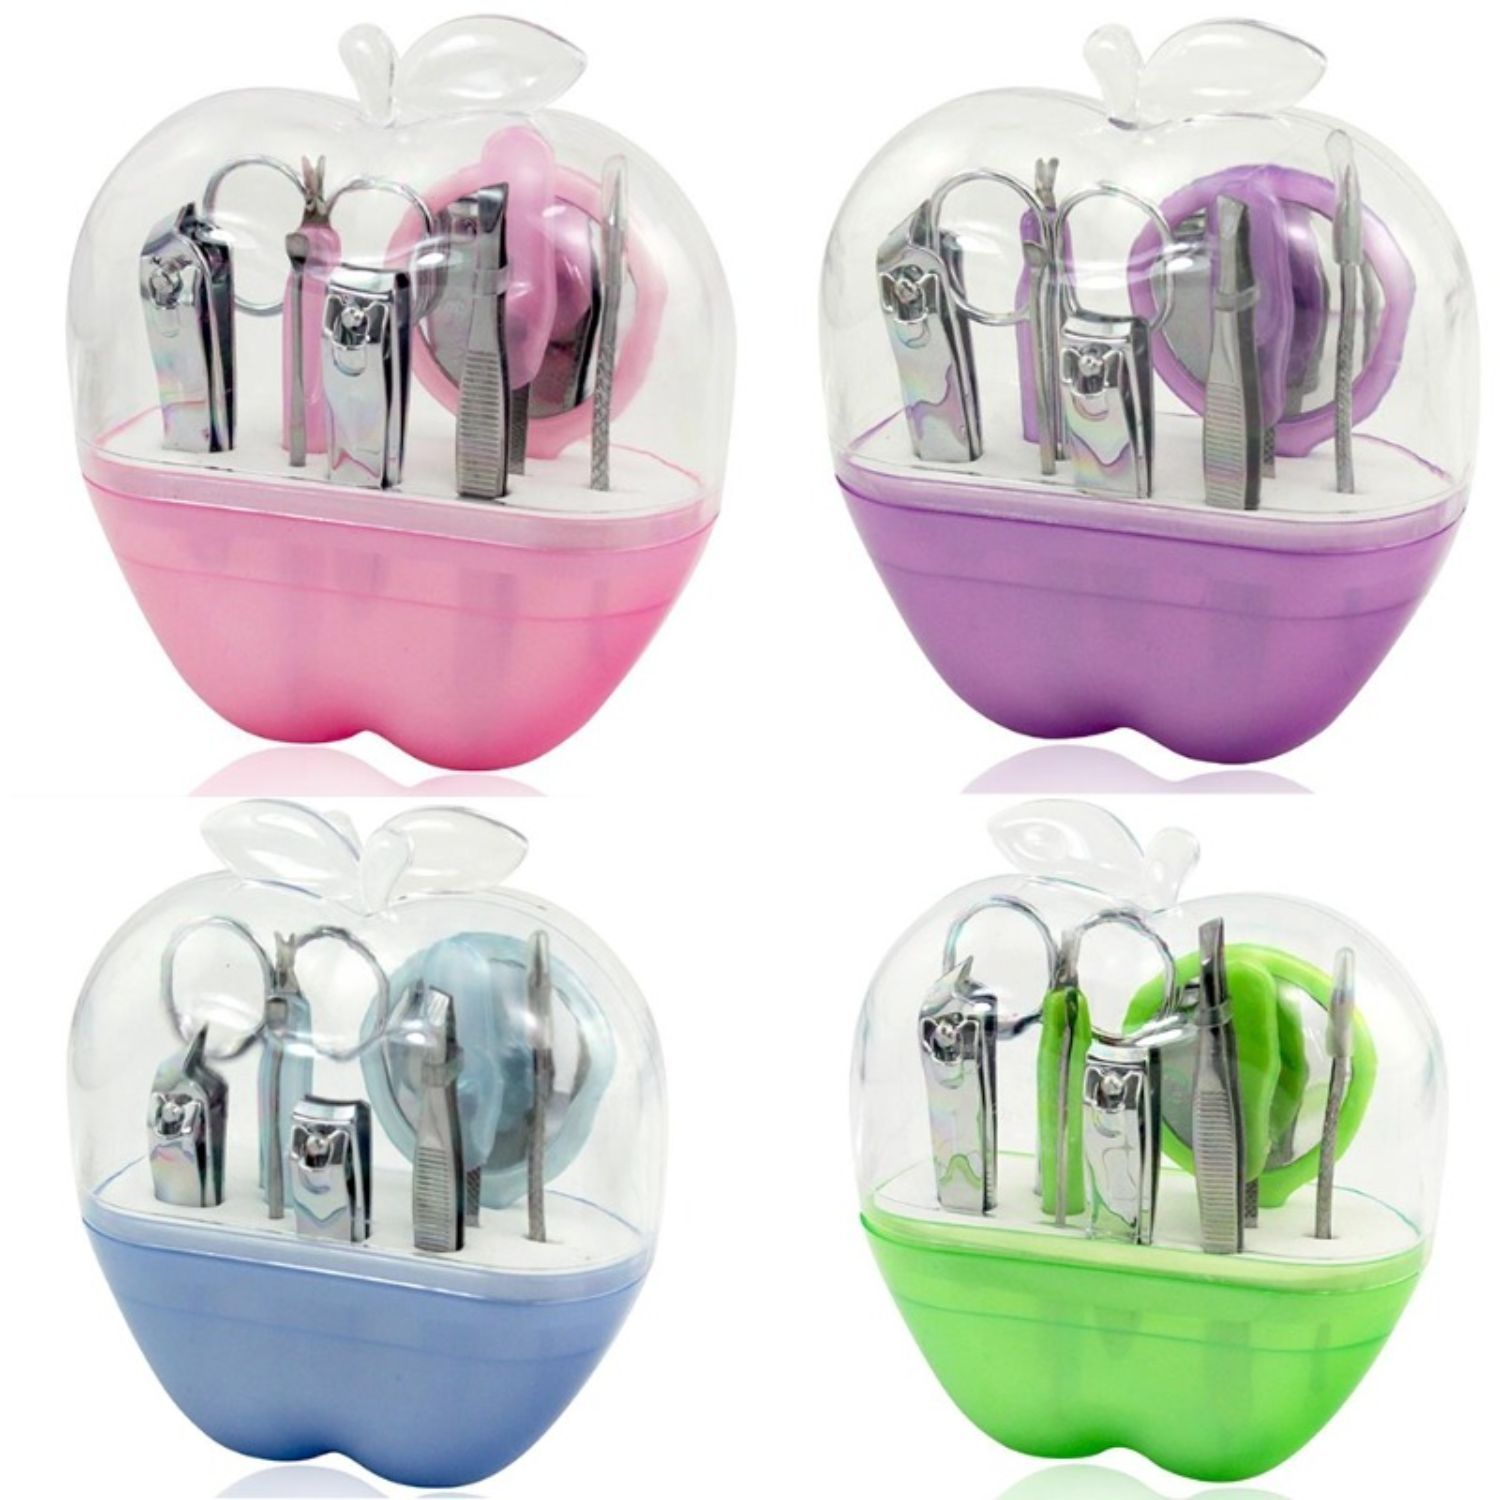 Buy GENERIC Pedicure & Manicure Tools Kit (7in1) Online at Low Prices in  India - Amazon.in